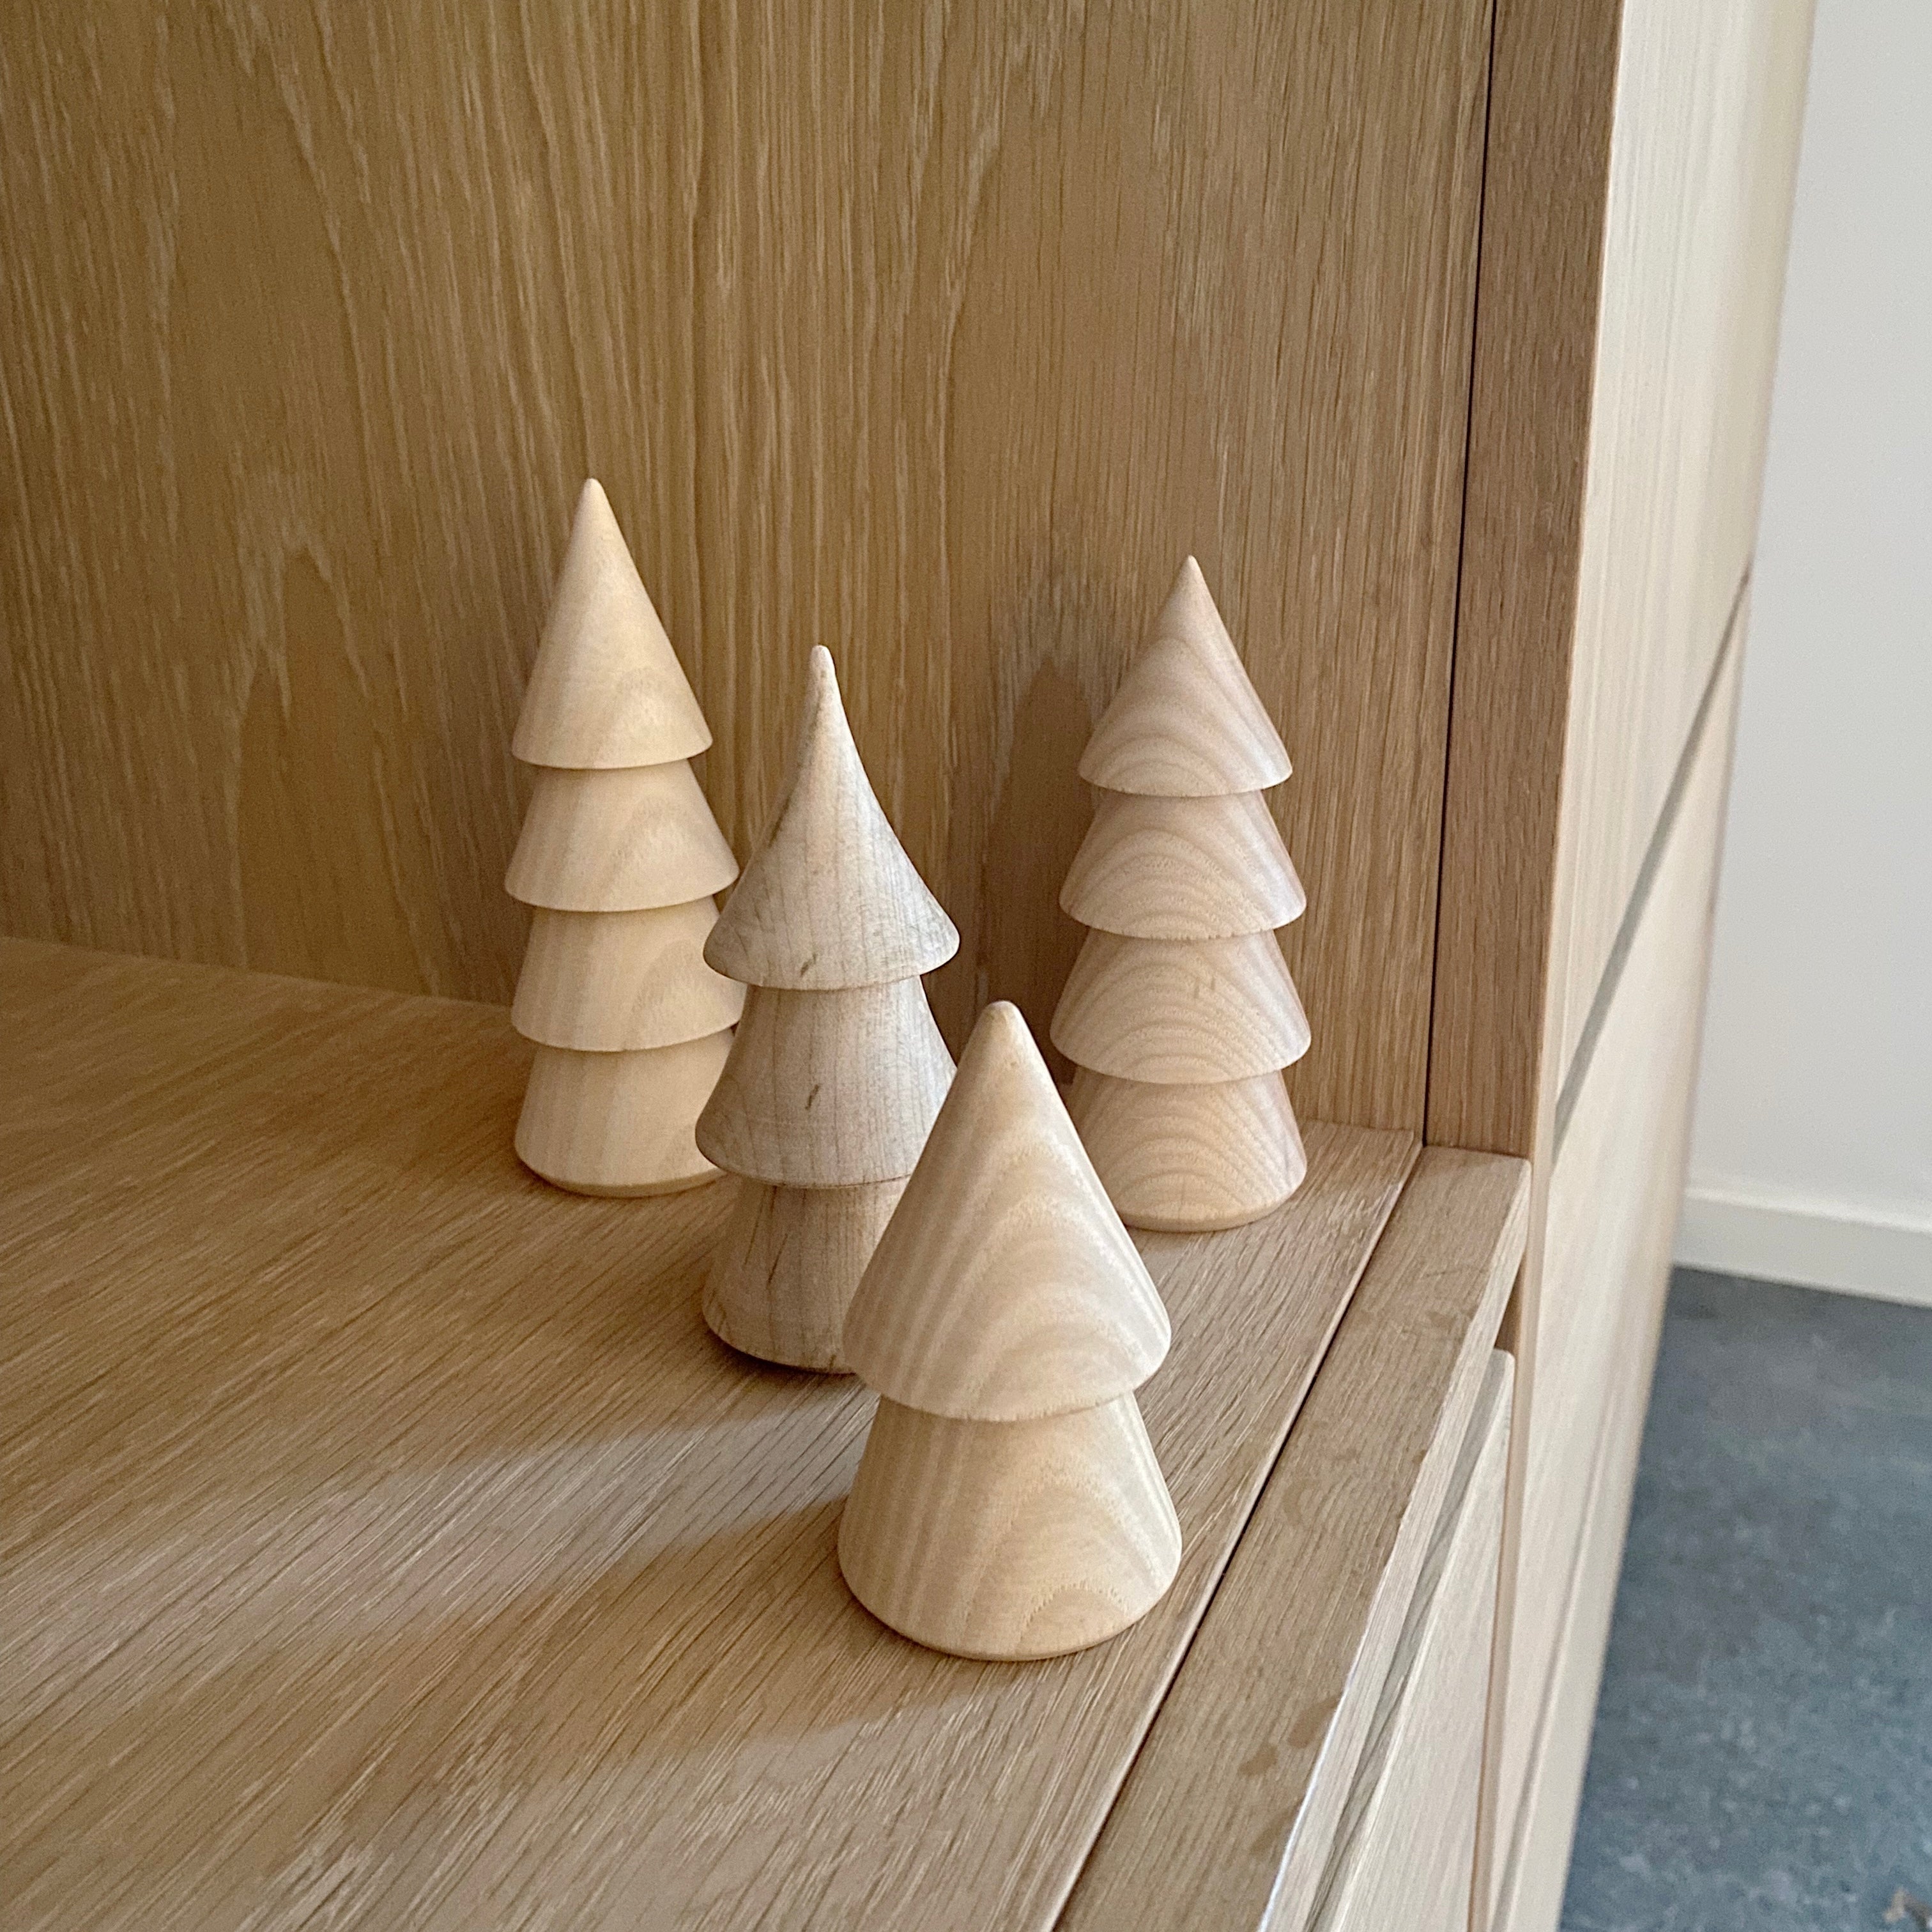 Bug in my home hand-carved Christmas tree - pine tree, set of 4 trees